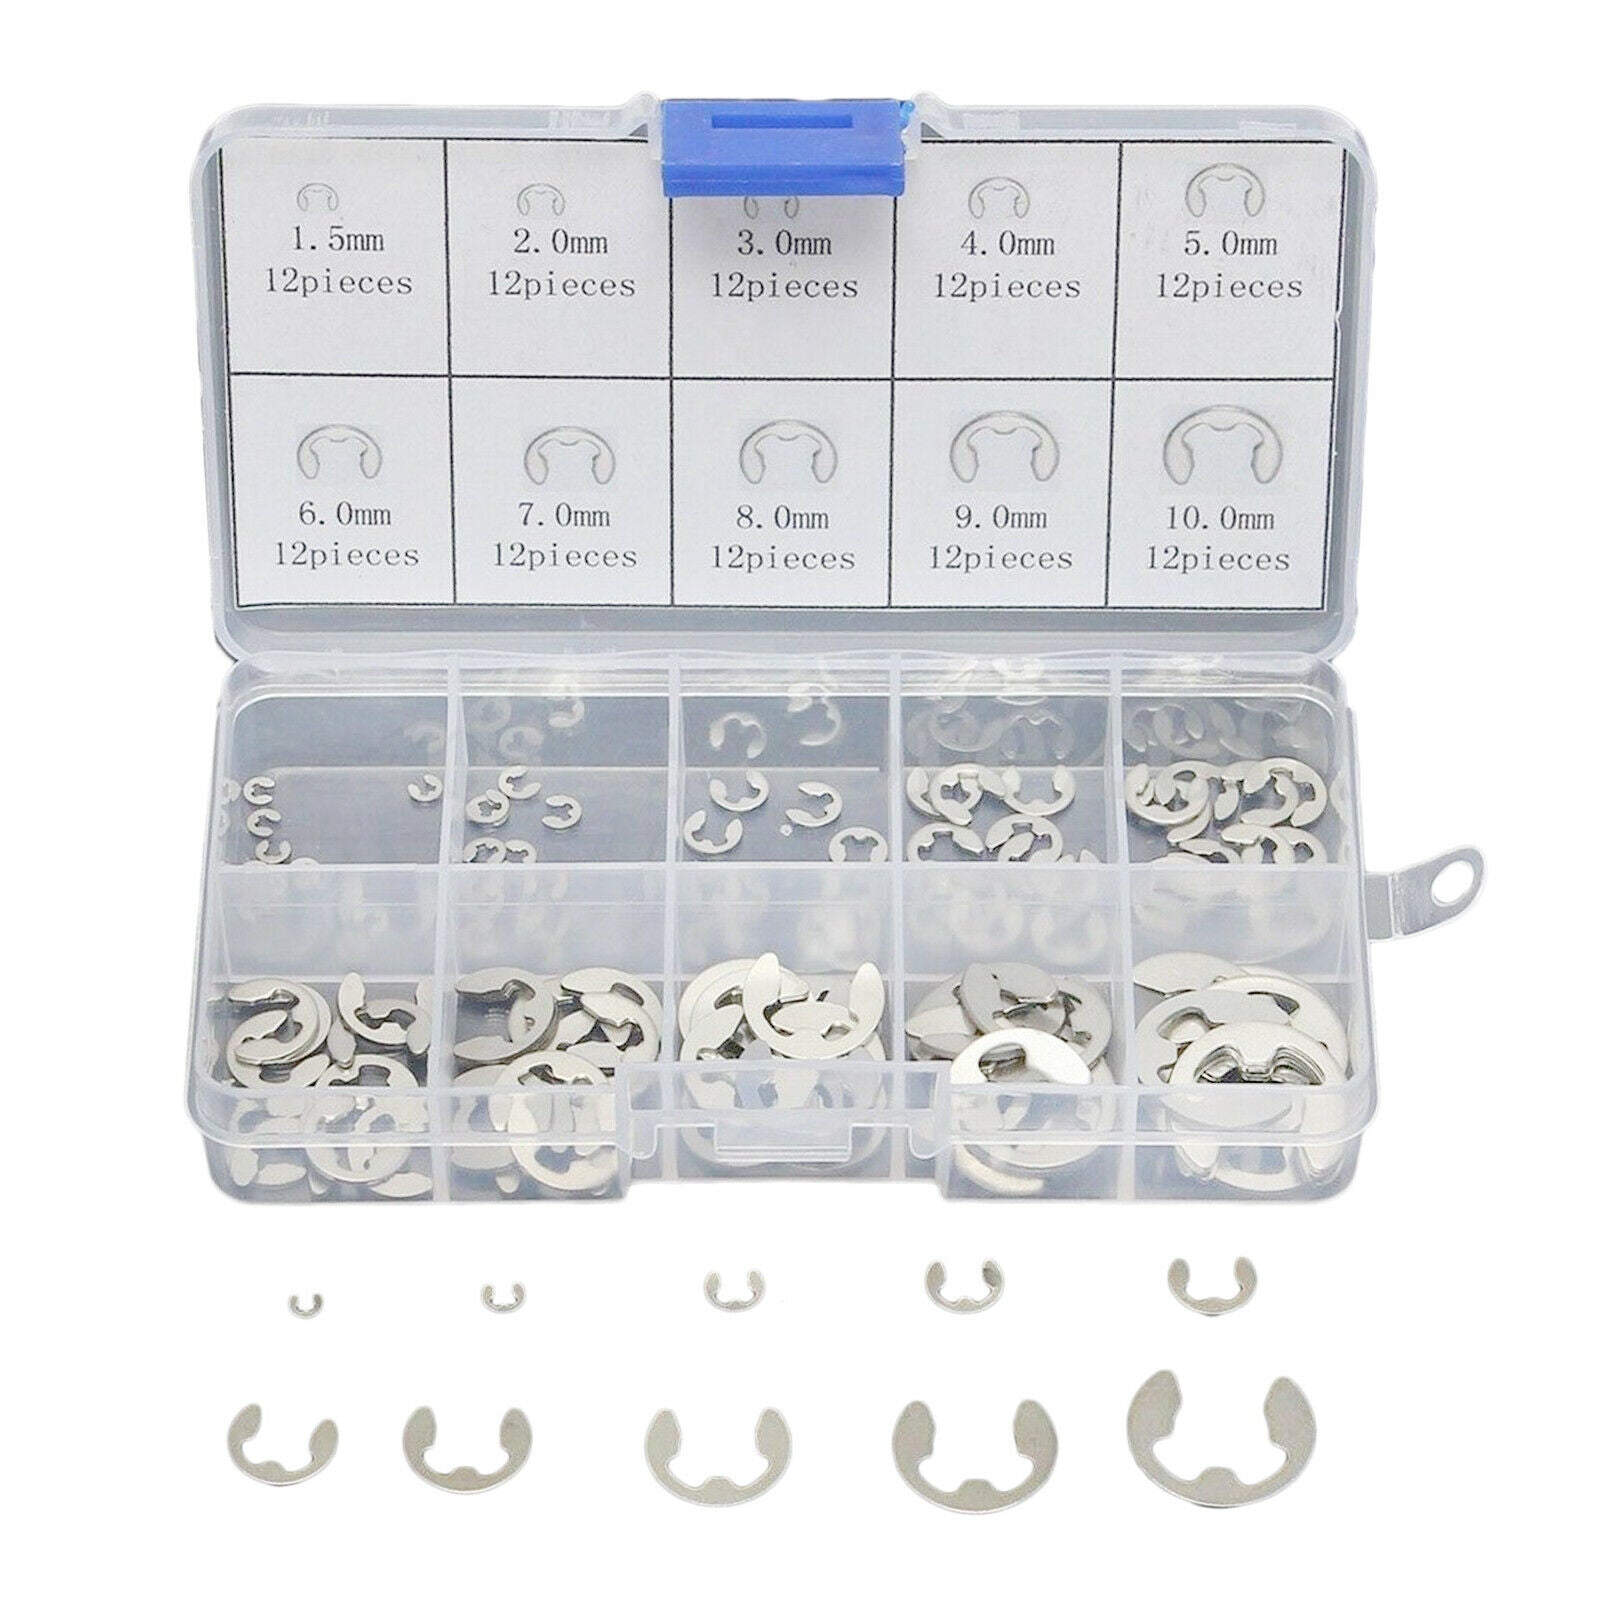 1.5mm 2mm to 10mm External E Clips - Circlip - Stainless Steel Assortment Kit